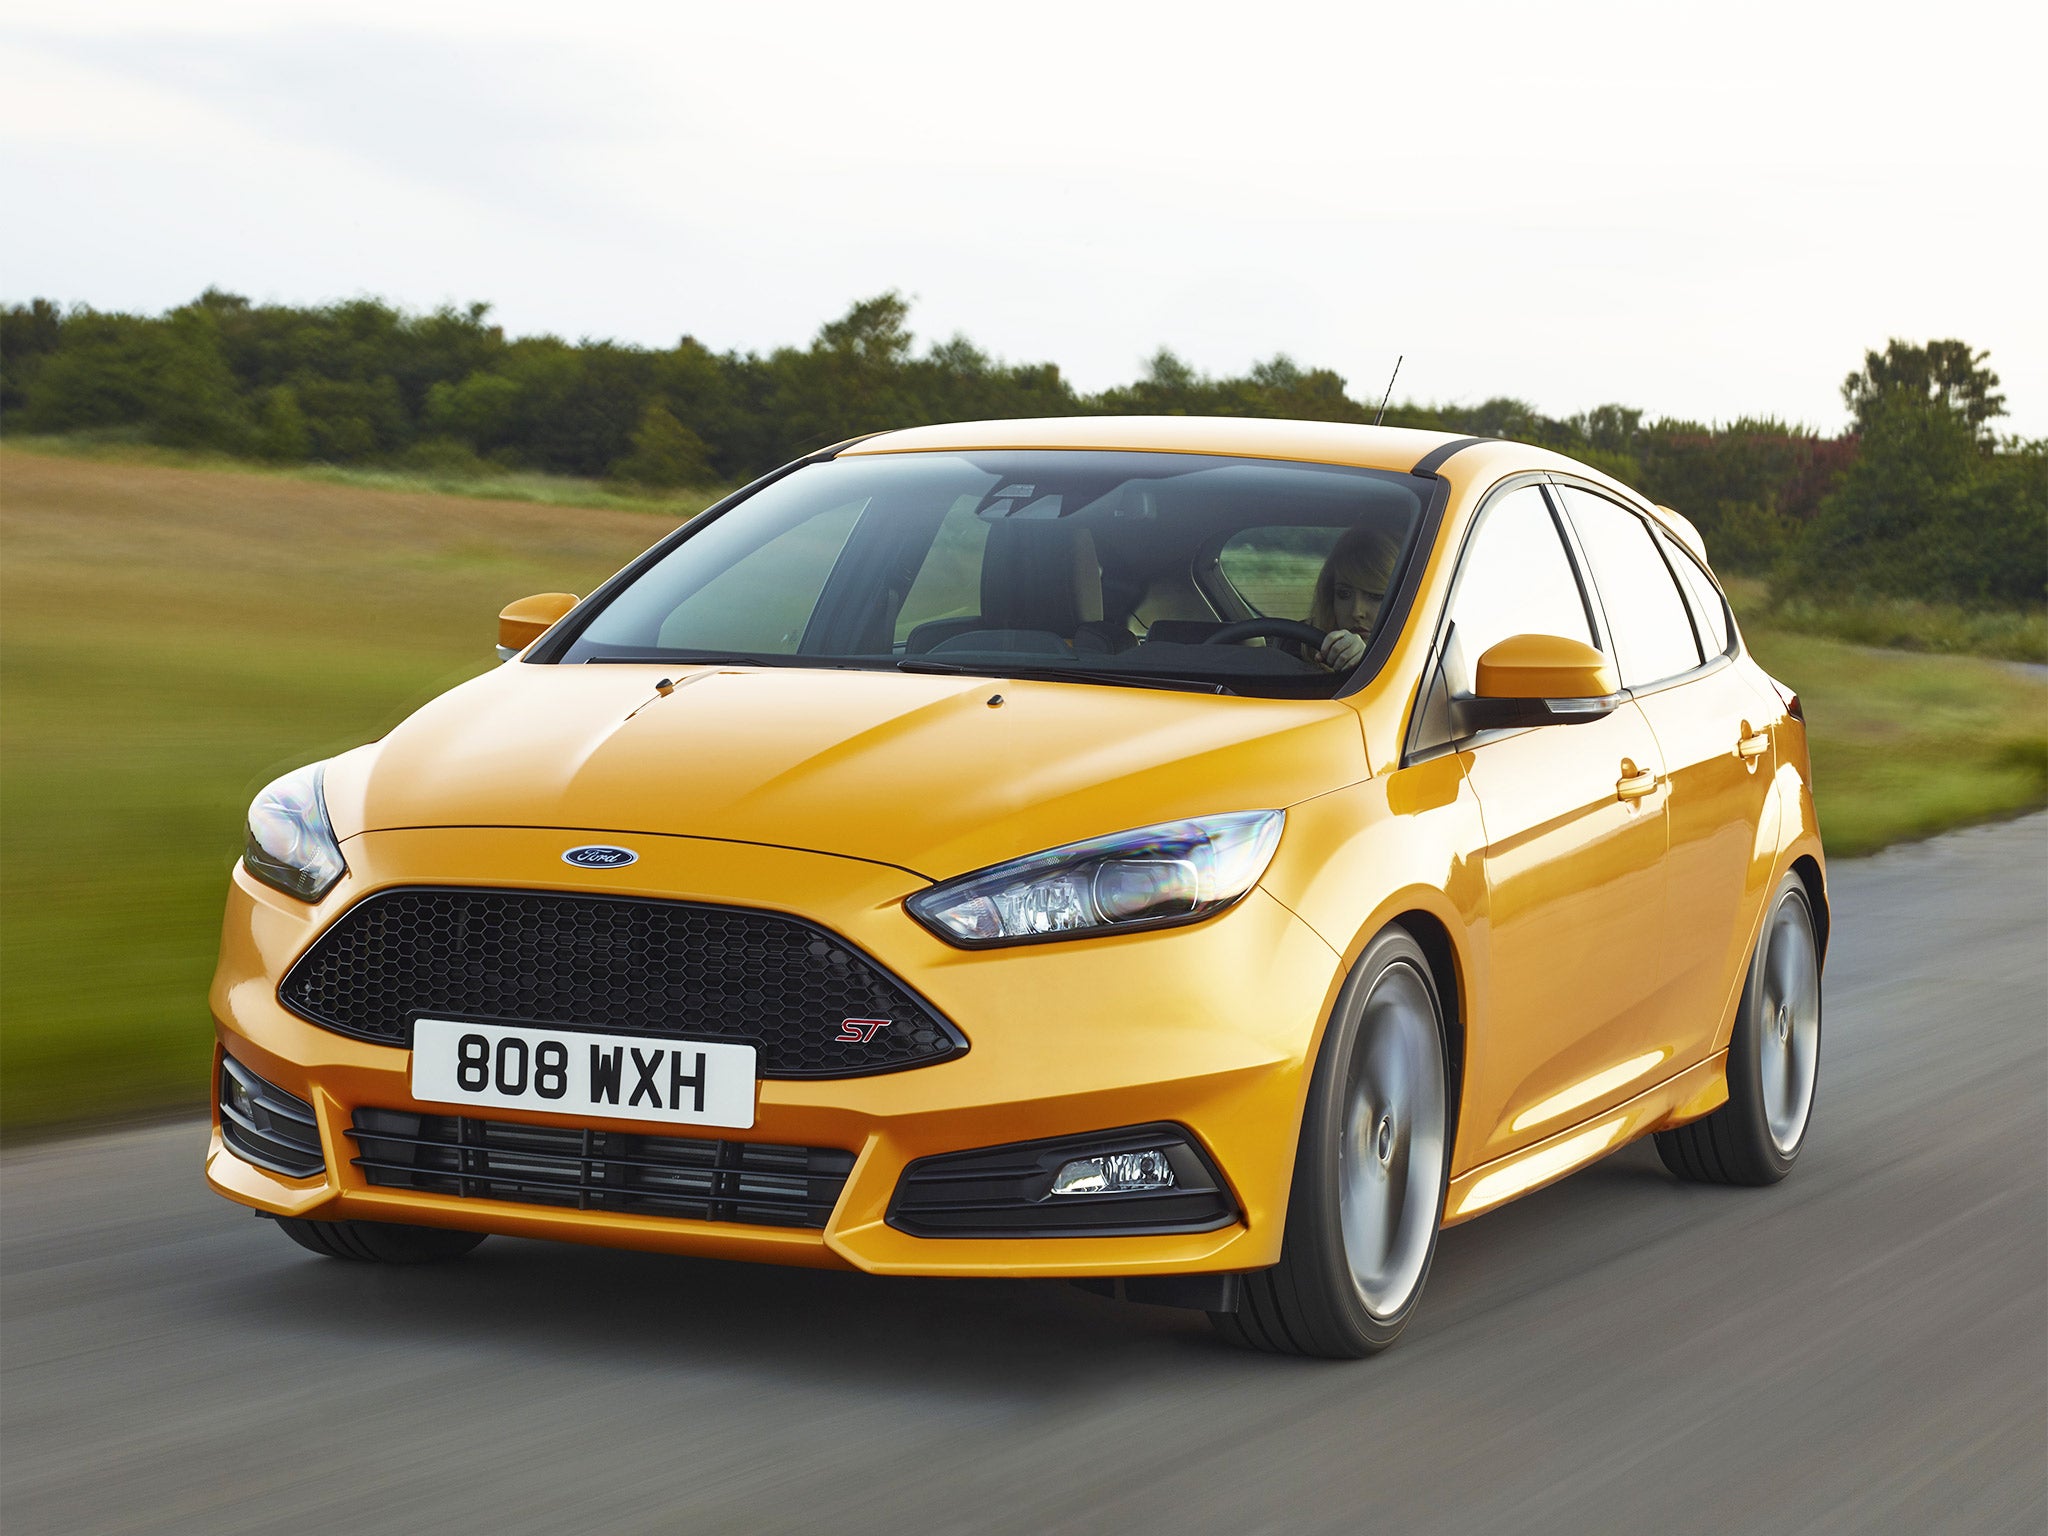 Ford Focus ST, motoring review On British roads, this model could give